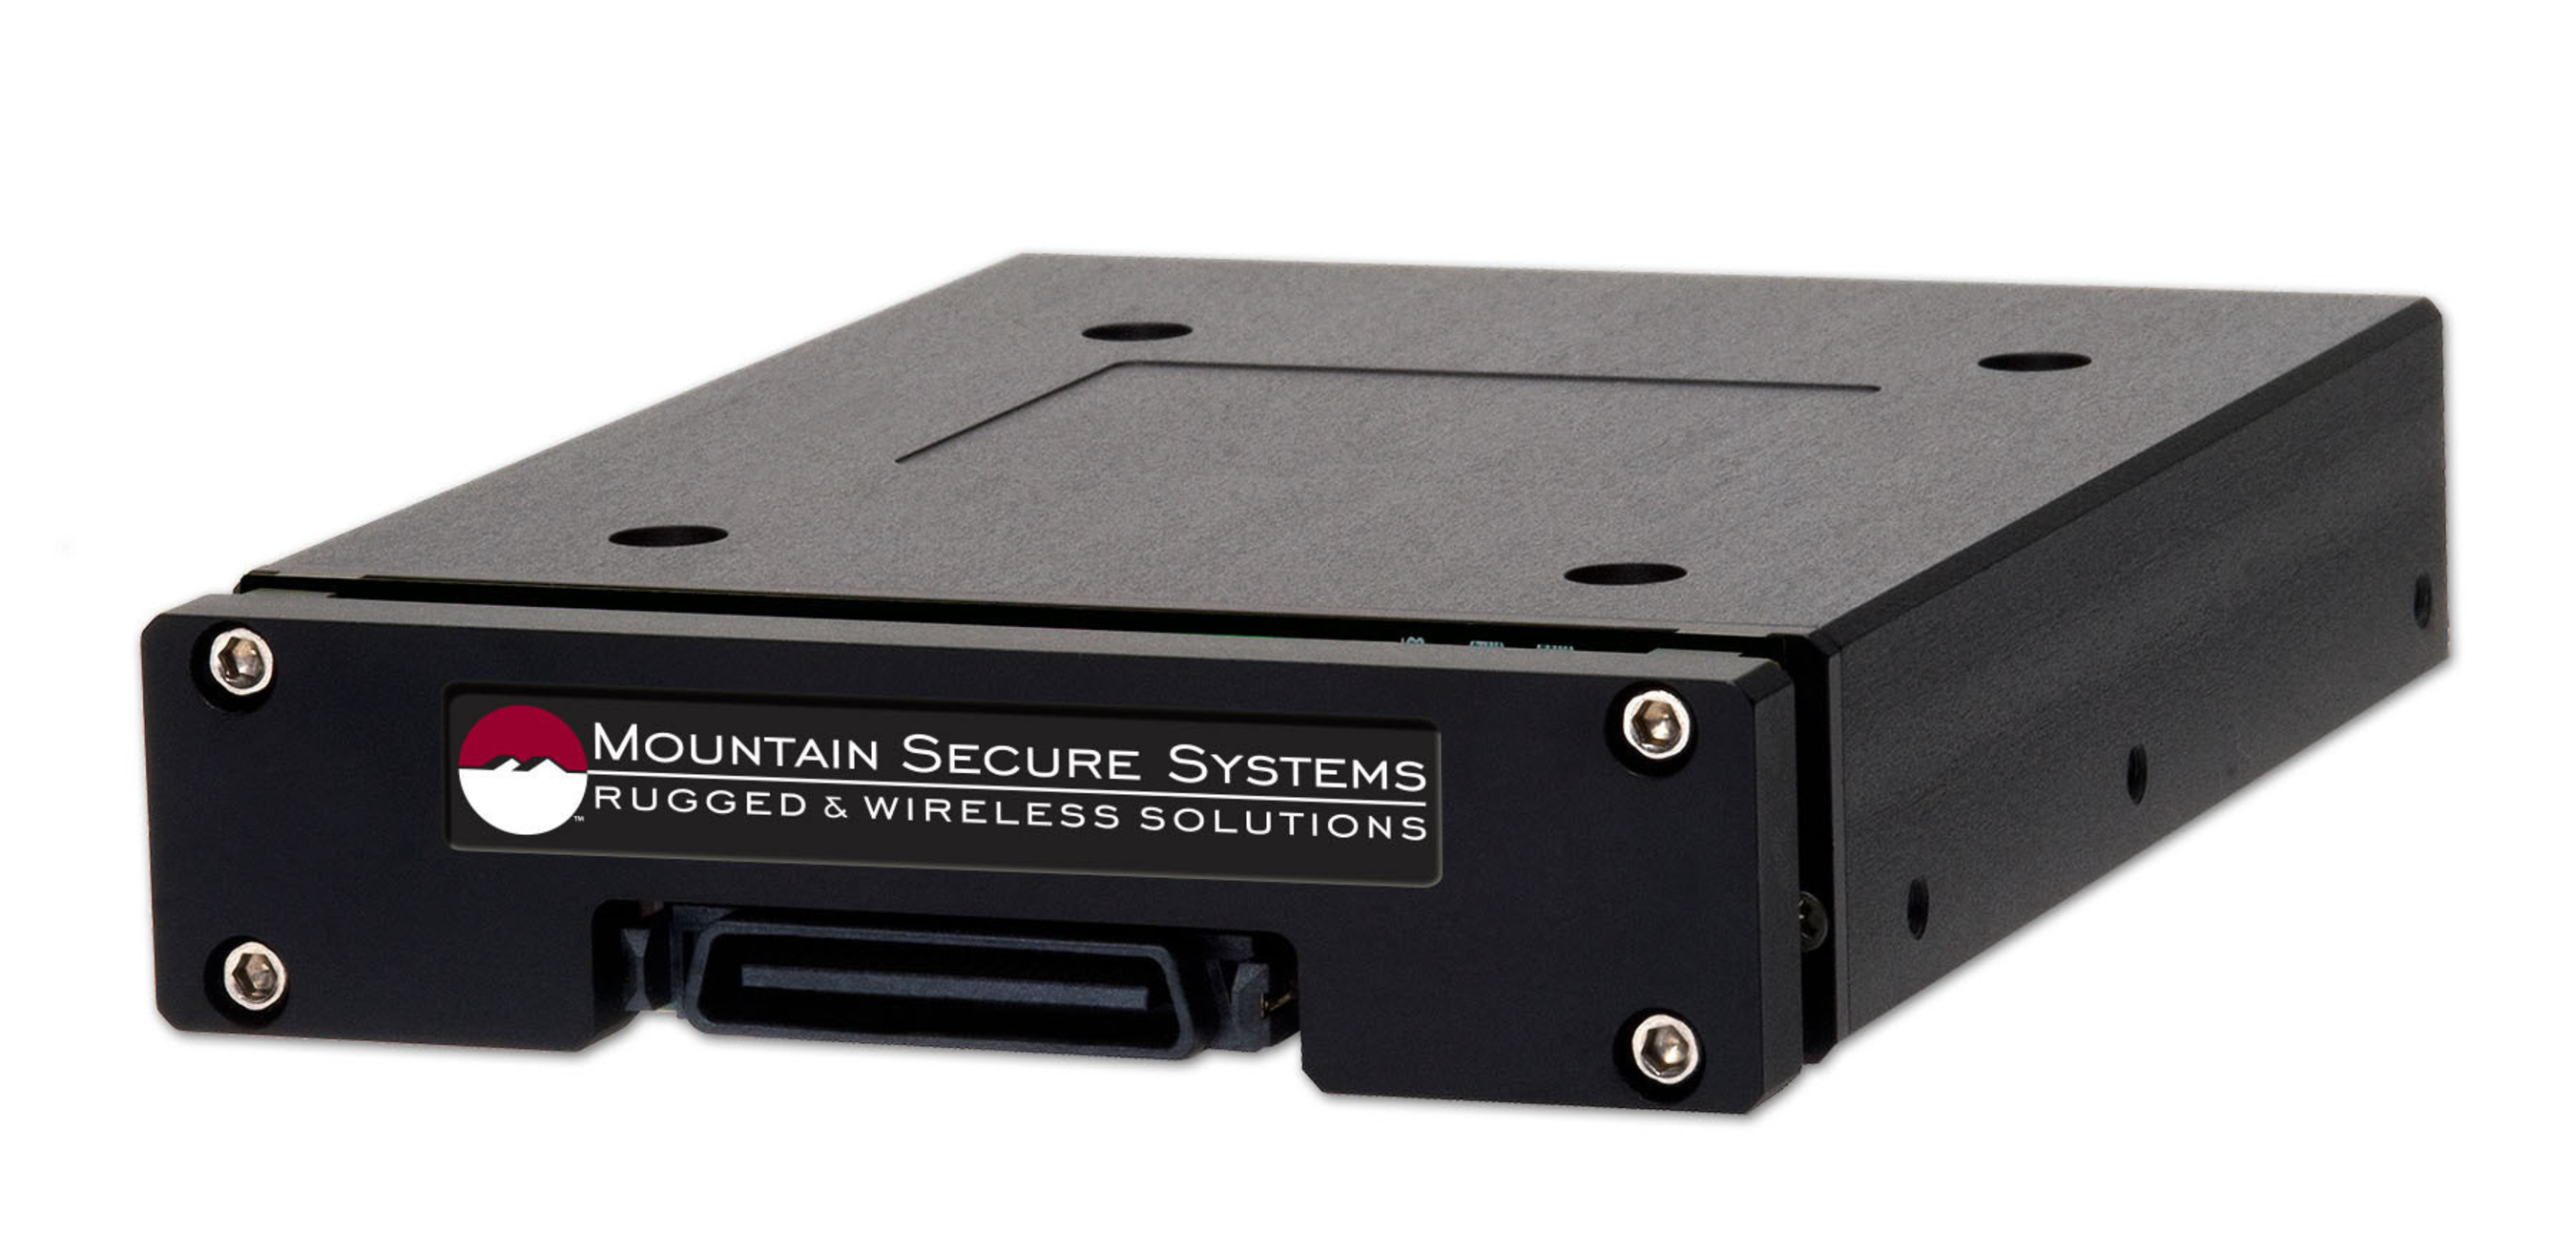 Fibre Channel Sled image - Mountain Secure Systems. (PRNewsFoto/Mountain Secure Systems) (PRNewsFoto/MOUNTAIN SECURE SYSTEMS)